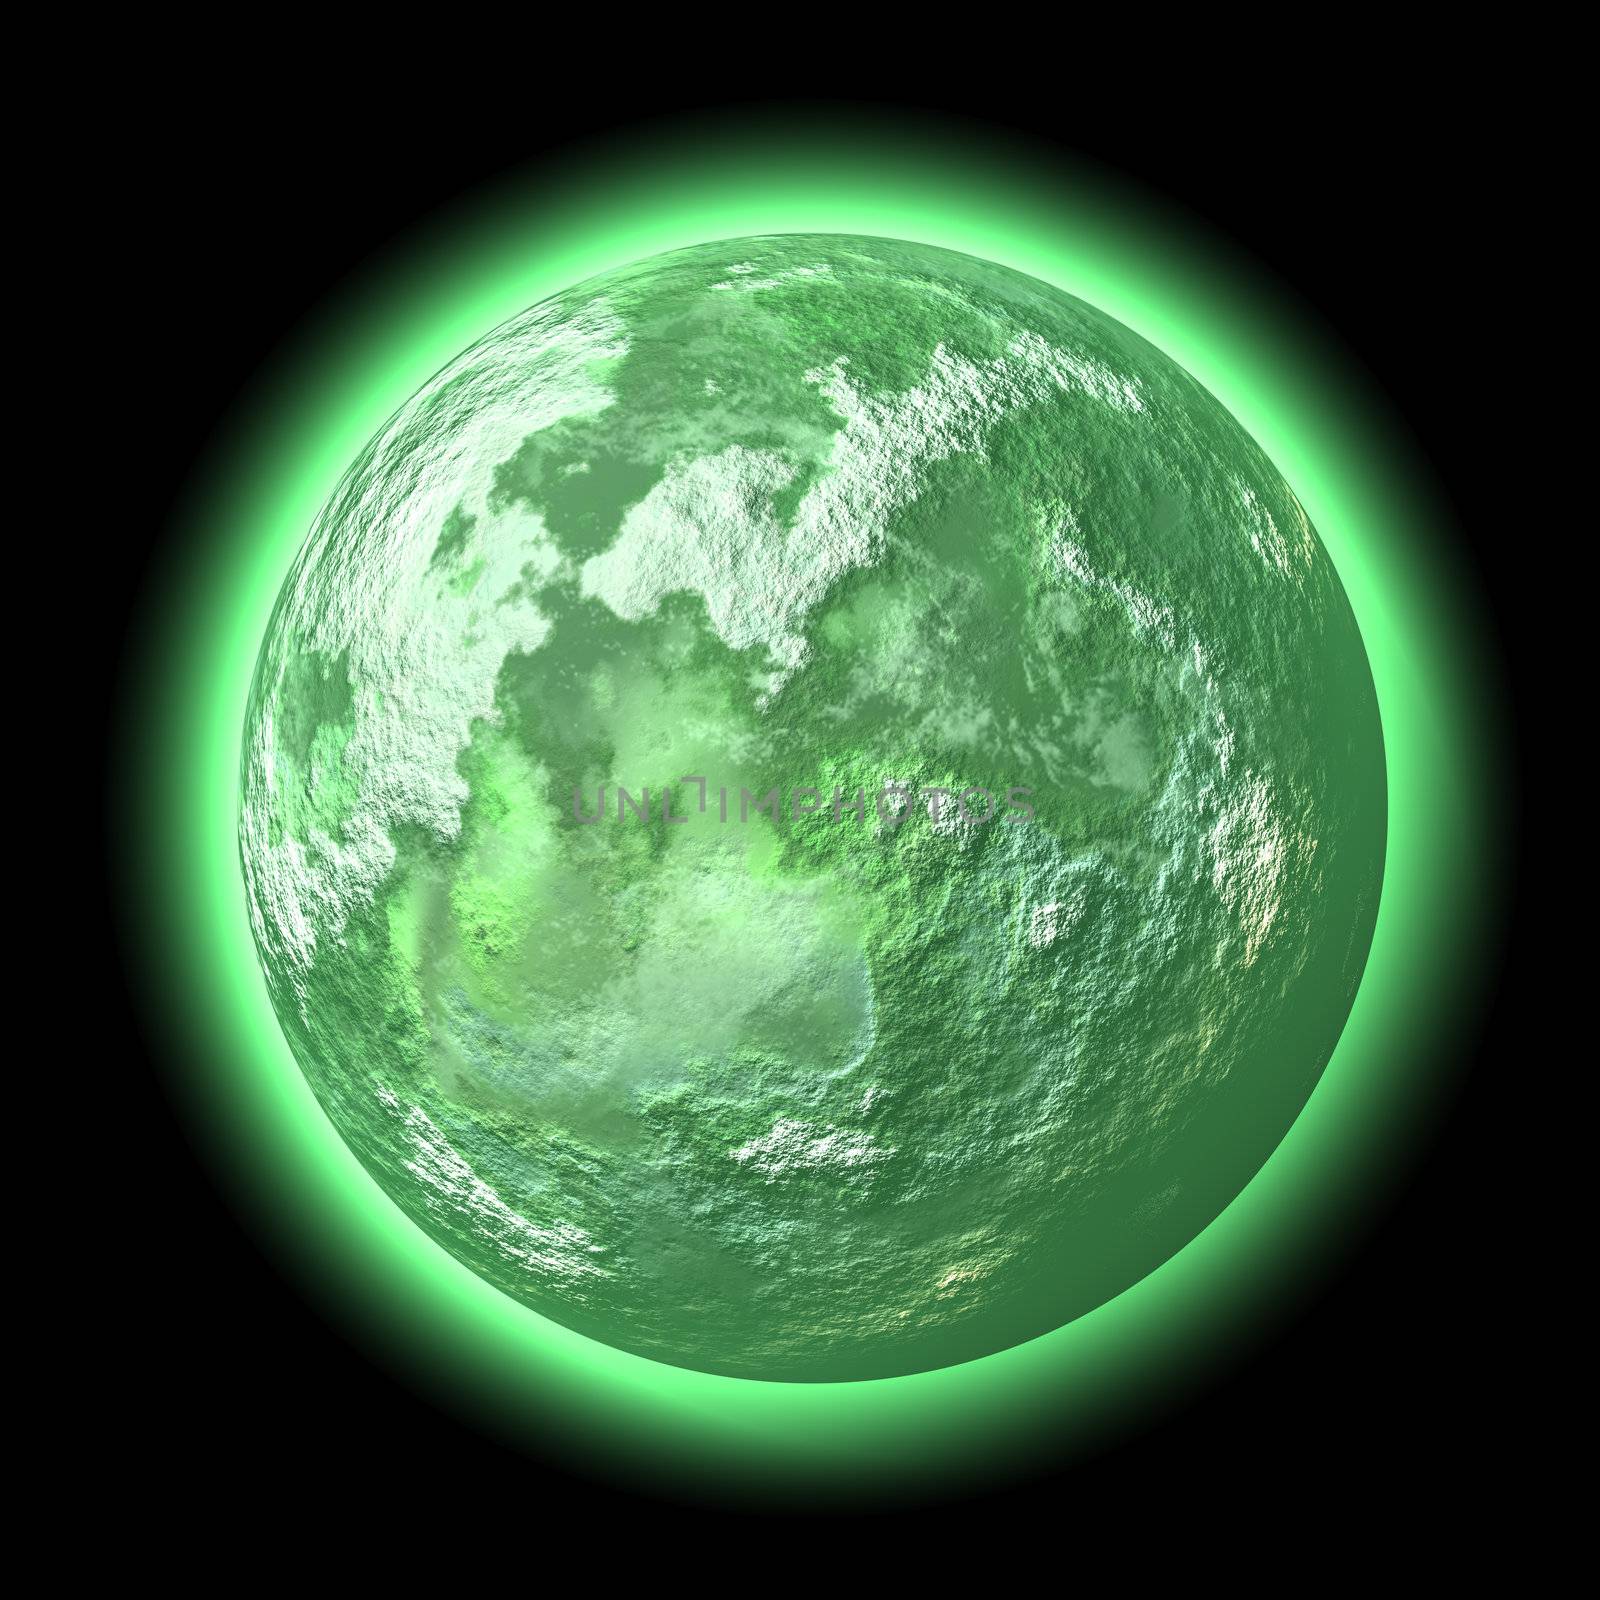 The green planet on black background.